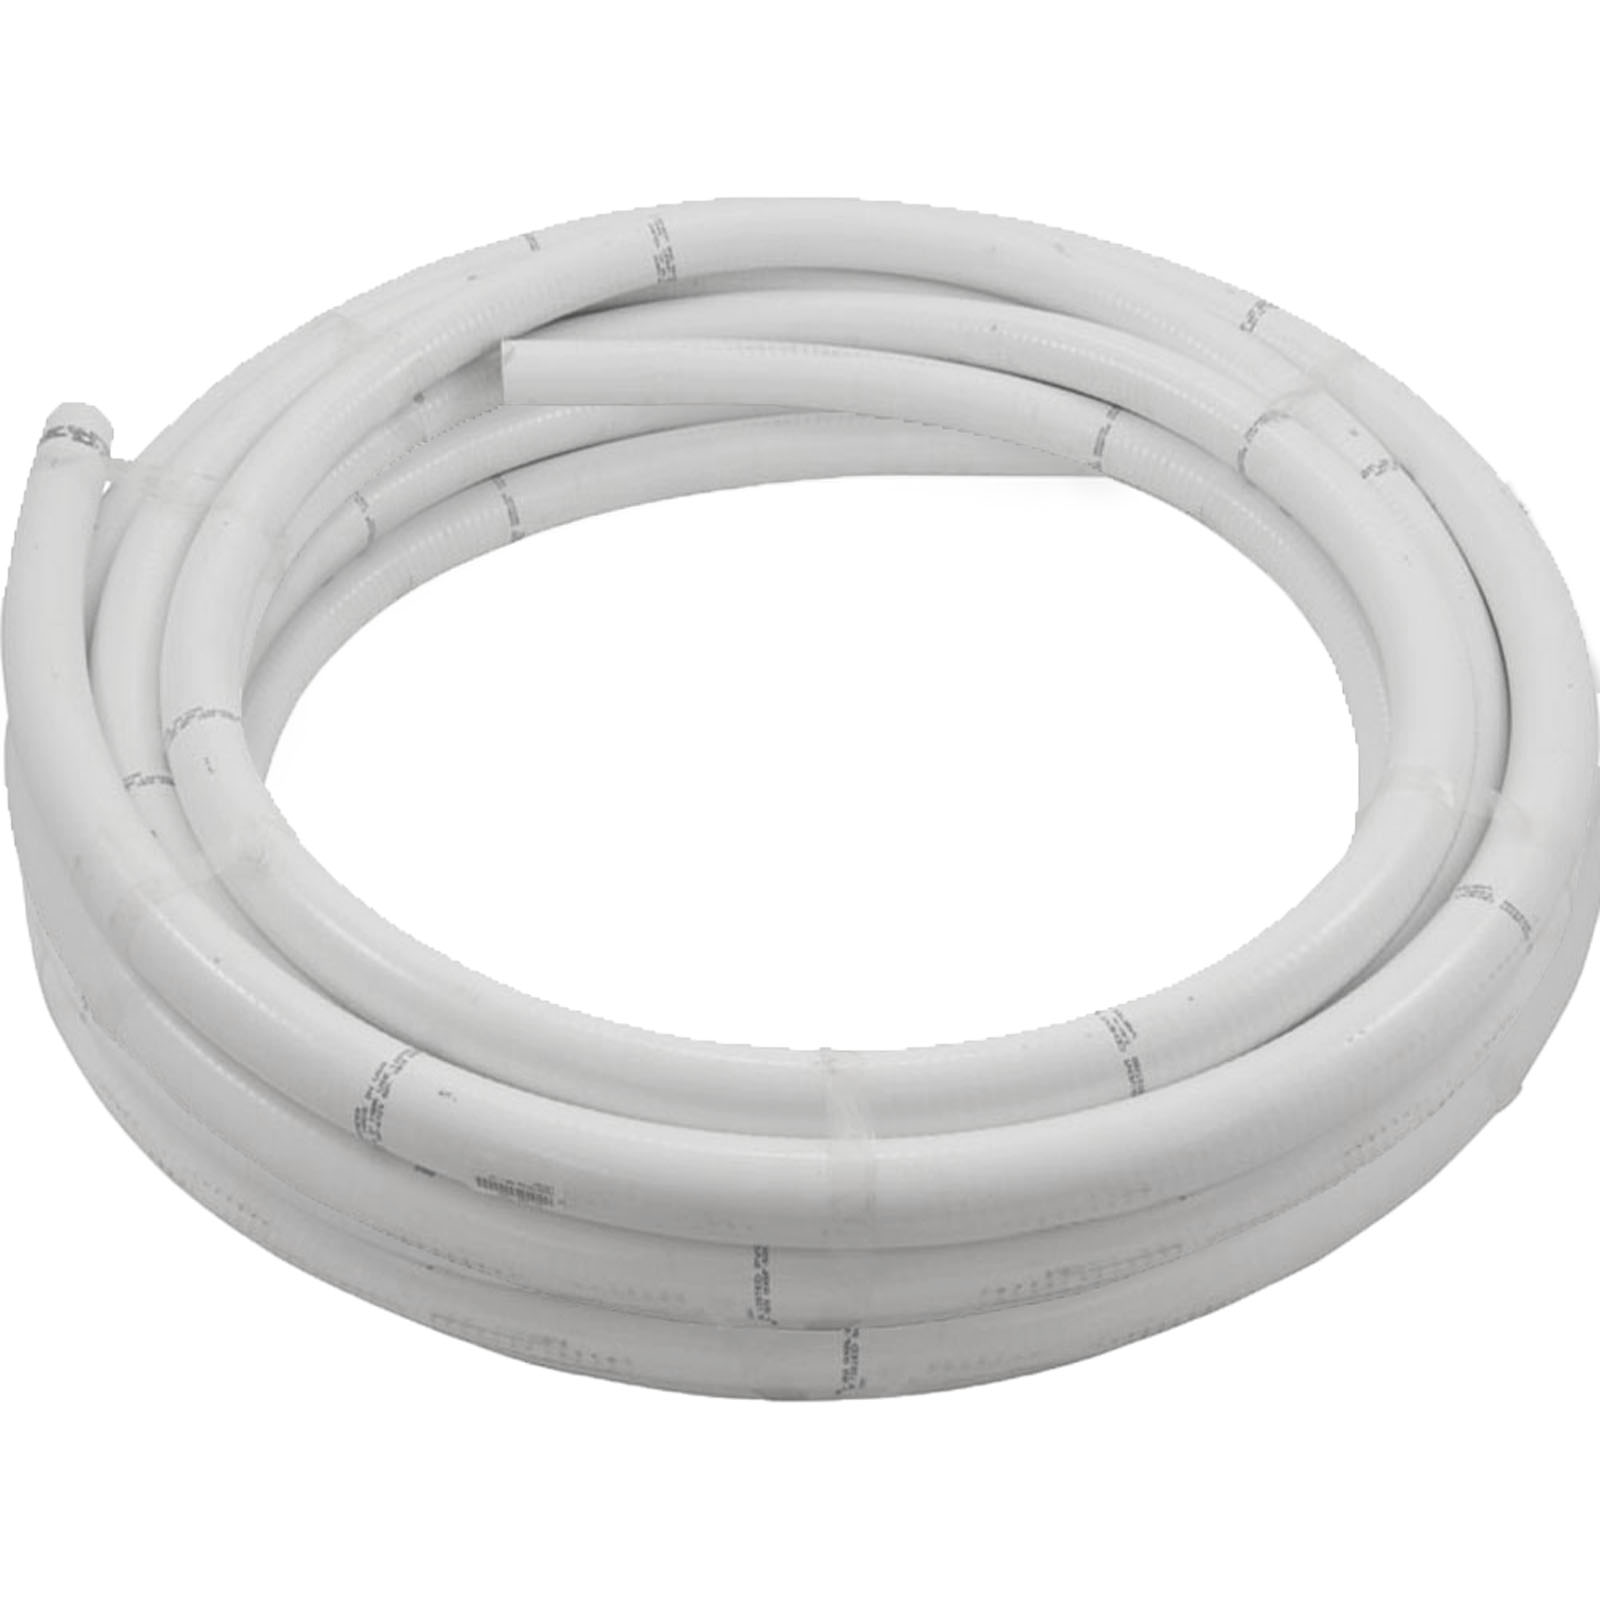 Picture of 22005-100-000 Flexible PVC Pipe CMP 1/2" x 100 Feet